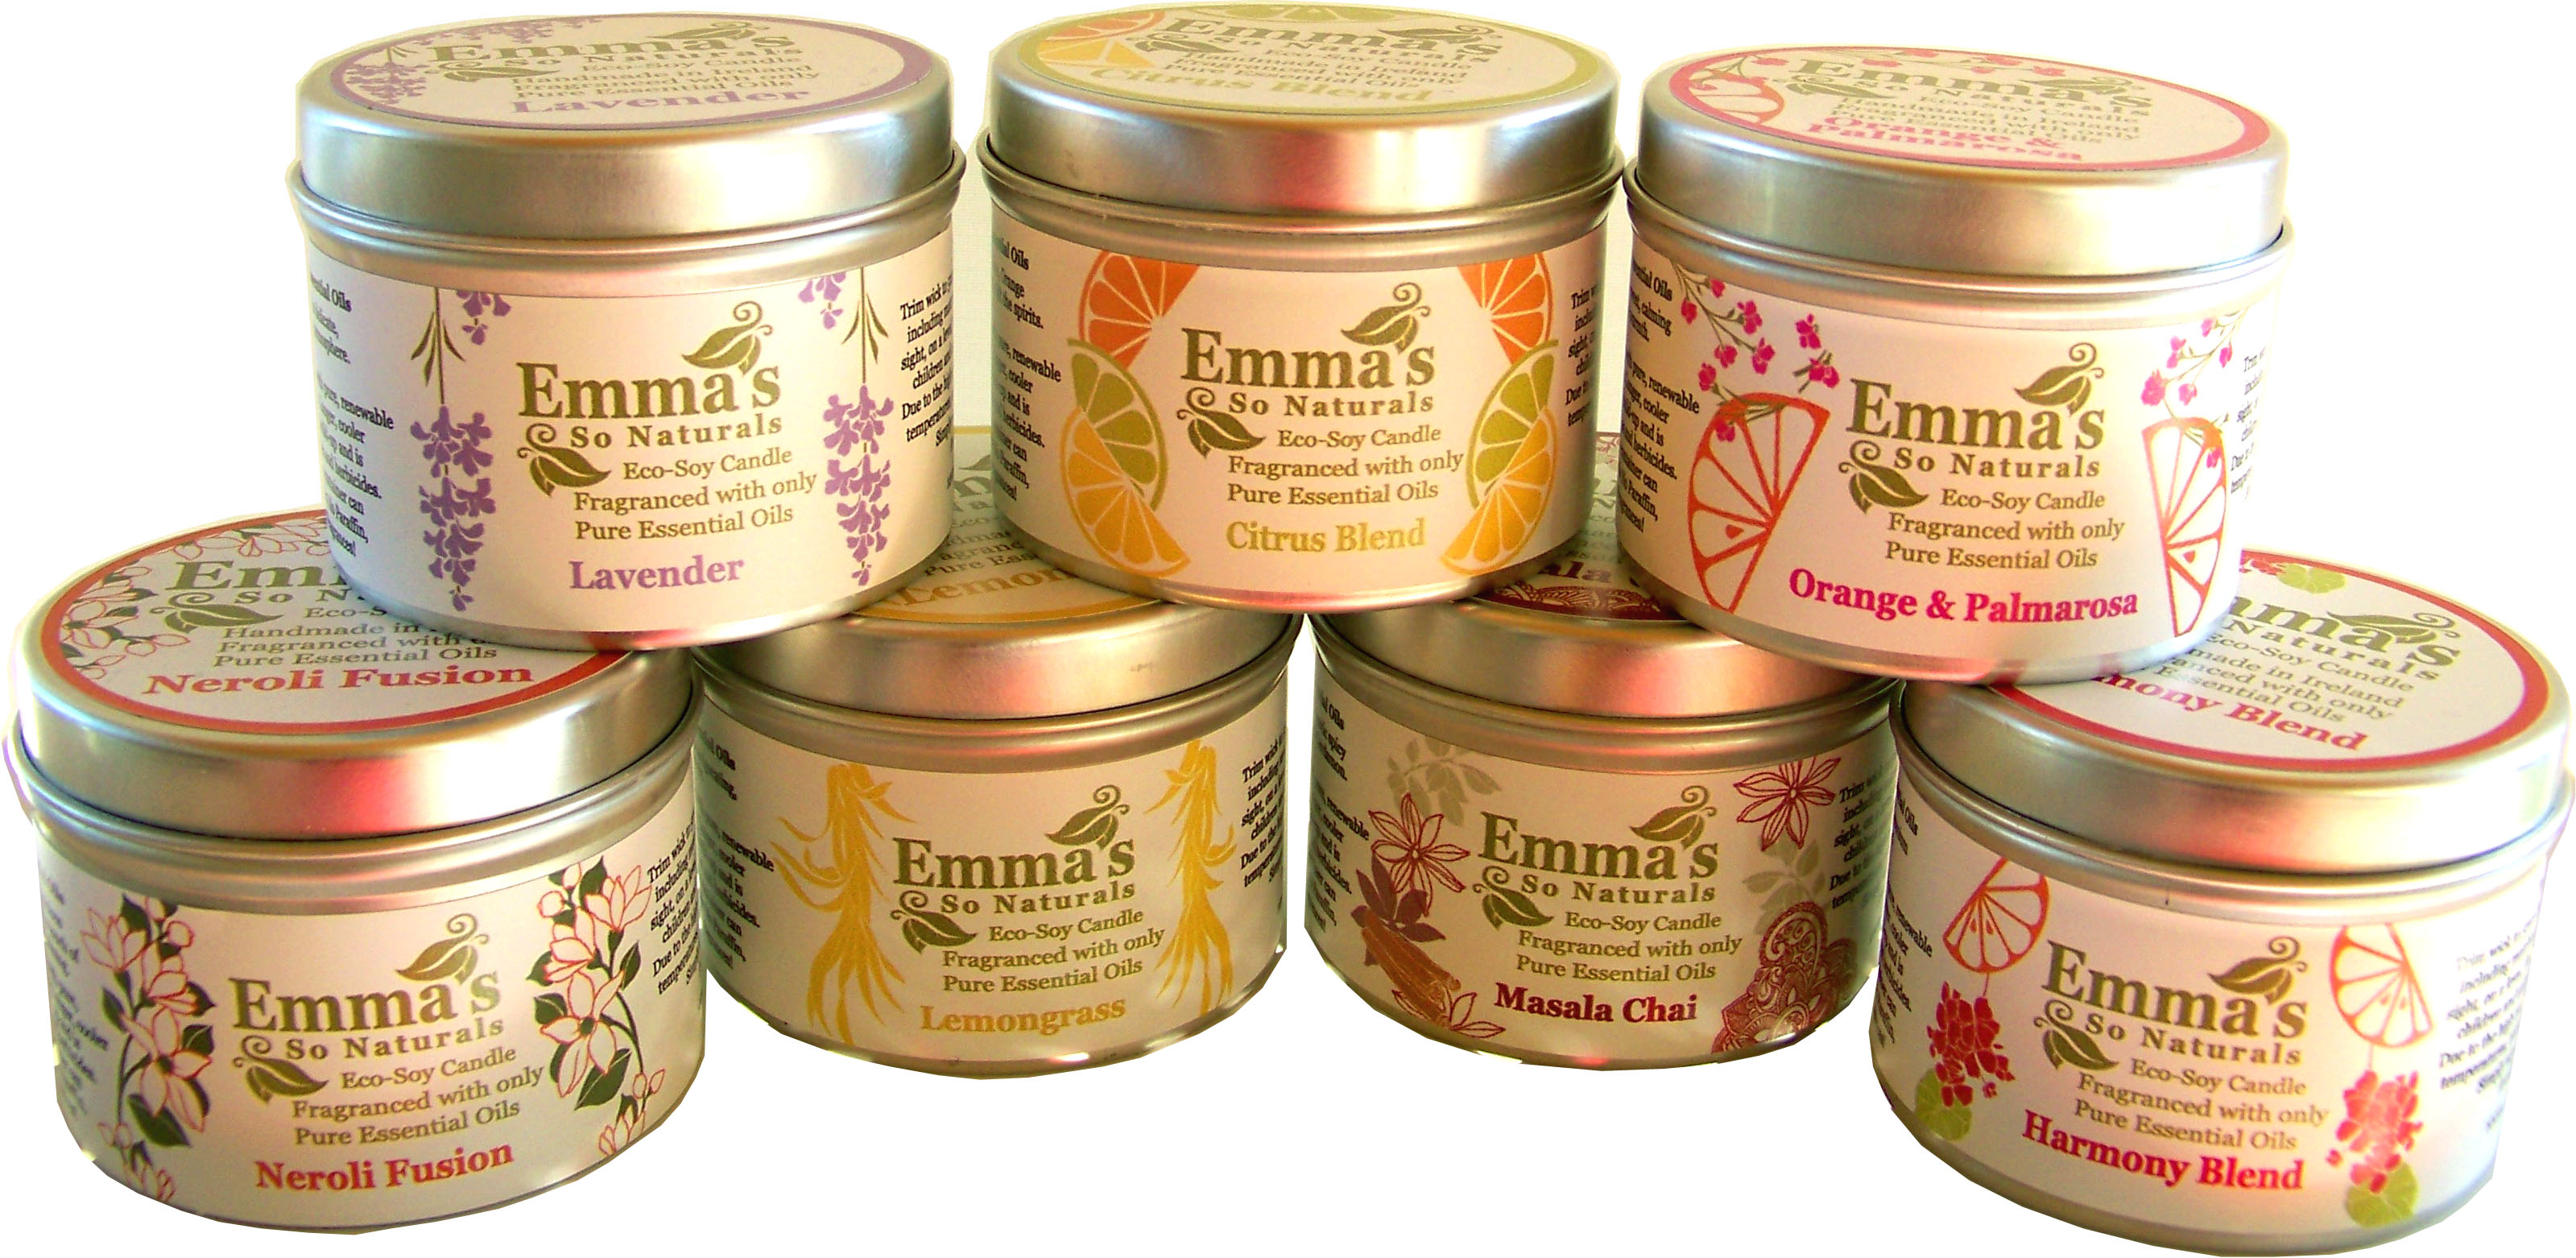 Emma's So Naturals Tin Candles Collection